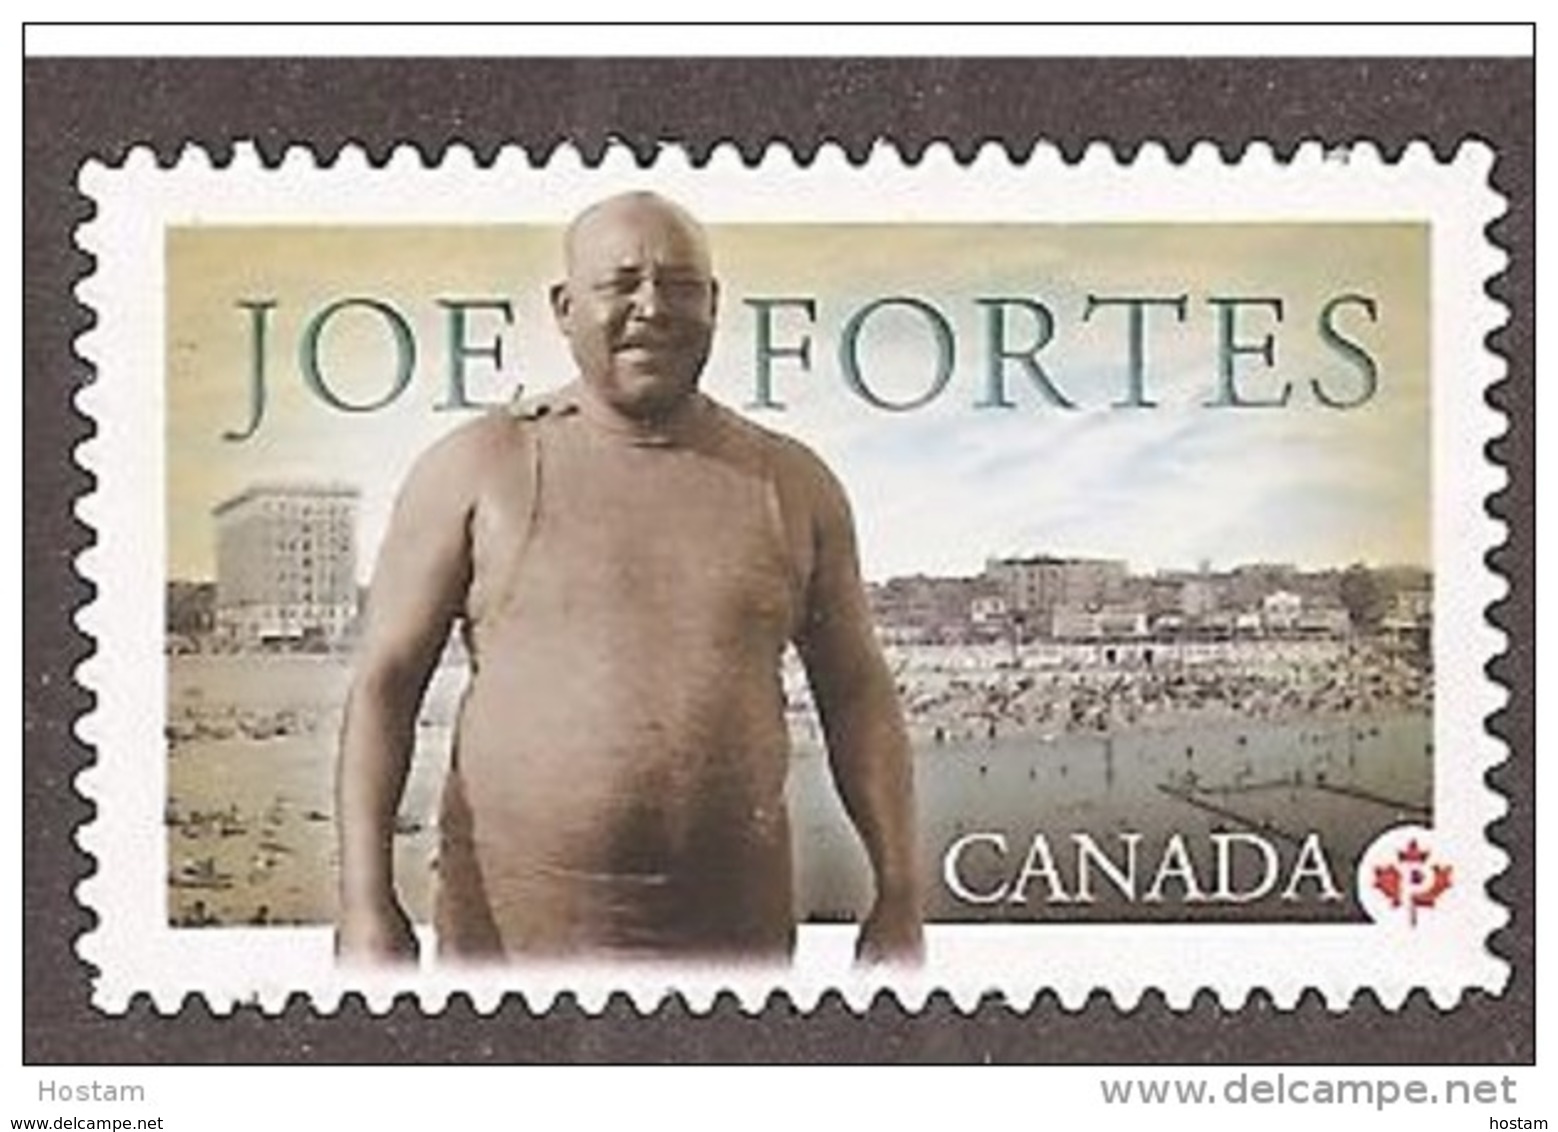 Canada, 2013, # 2620i, Joe Fortes,   P Stamp Die Cut . Mnh - Single Stamps